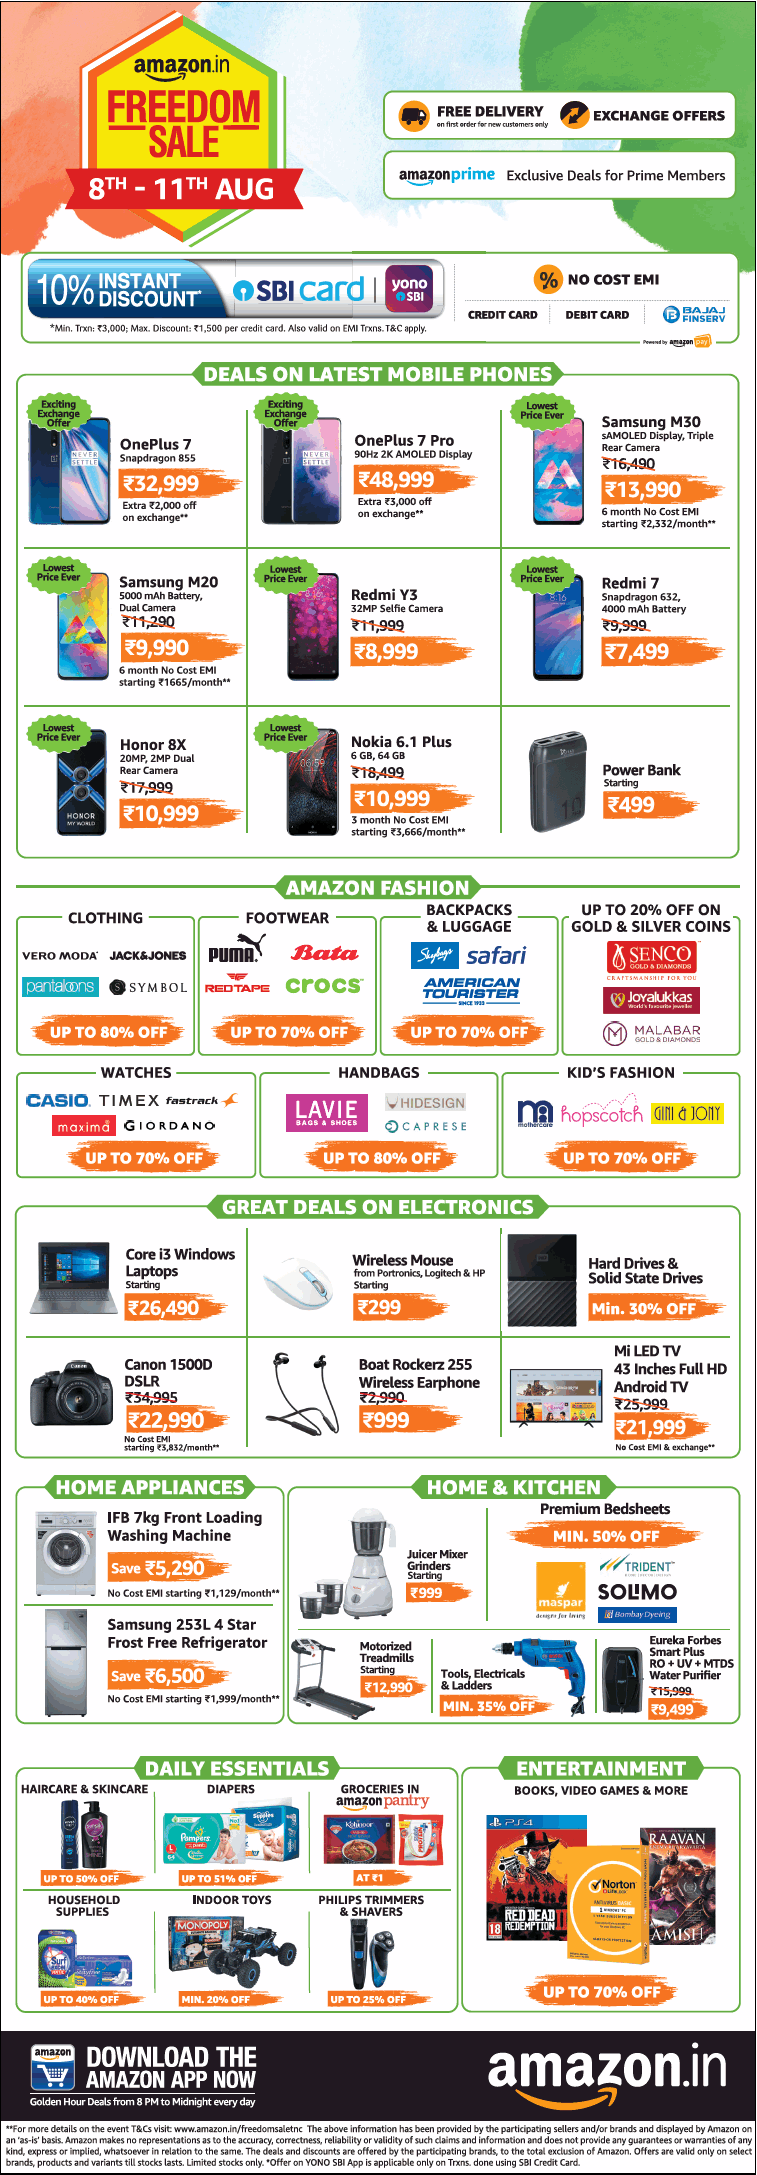 amazon-in-freedom-sale-ad-times-of-india-delhi-08-08-2019.png